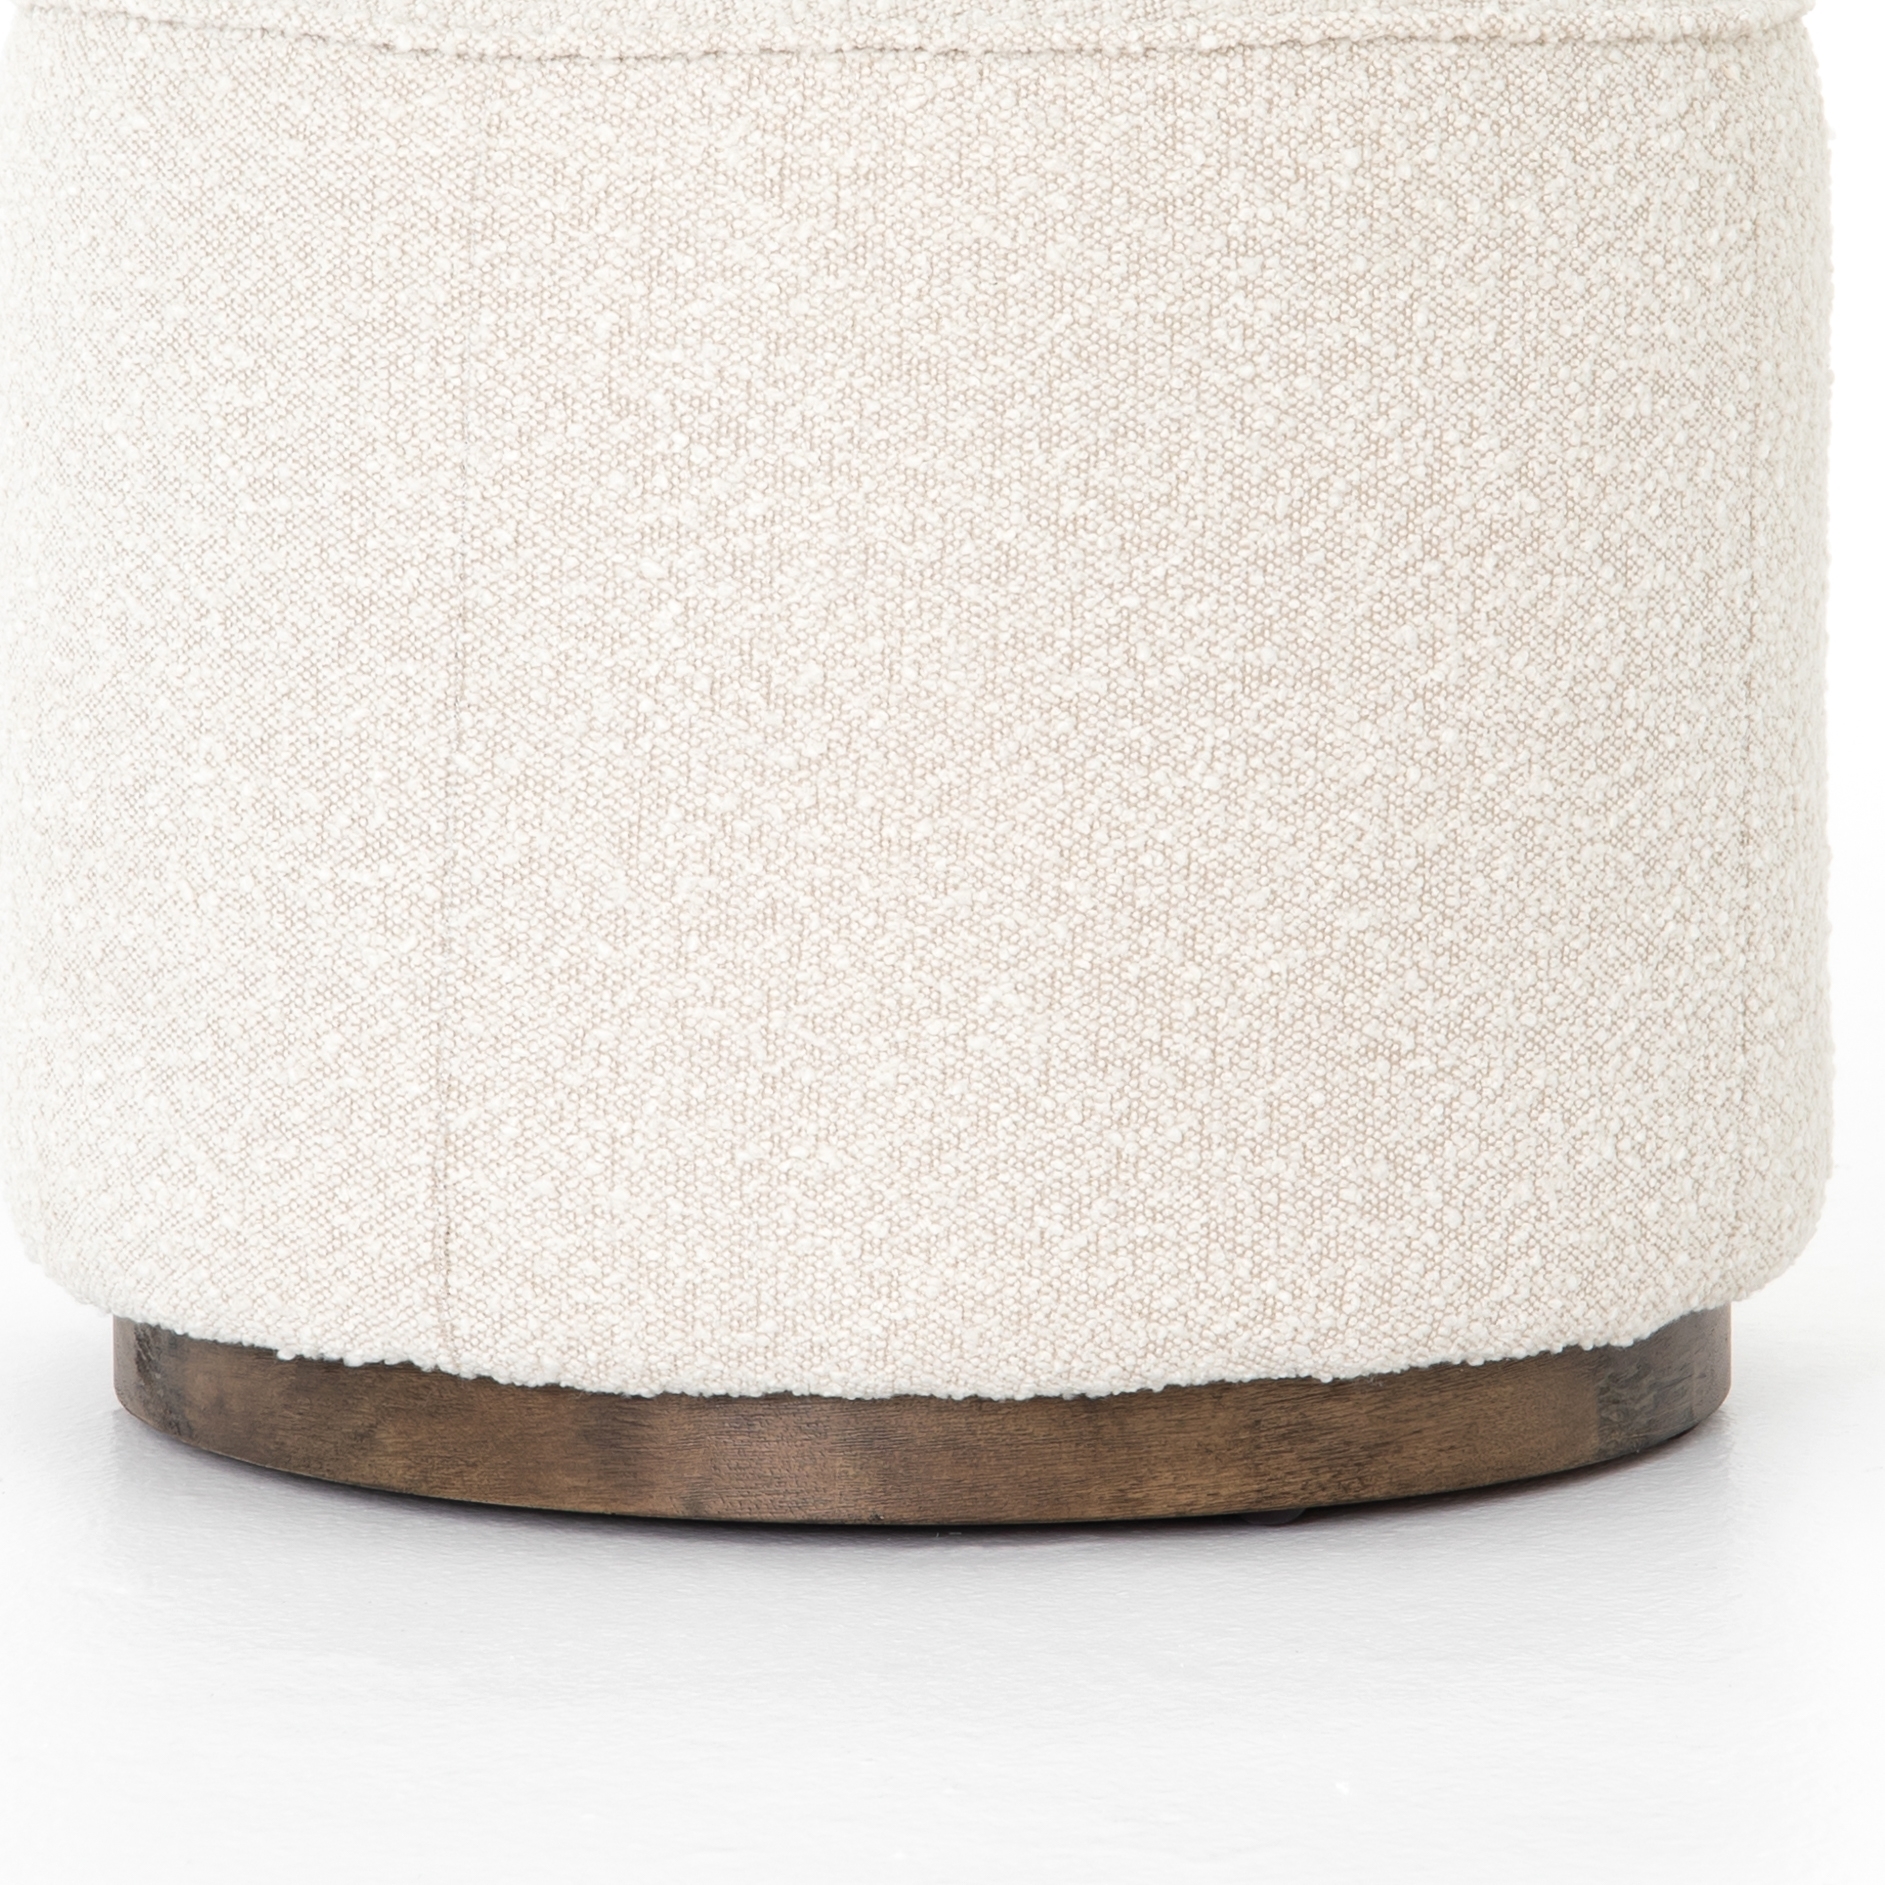 Sinclair Round Ottoman-Knoll Natural - Image 3